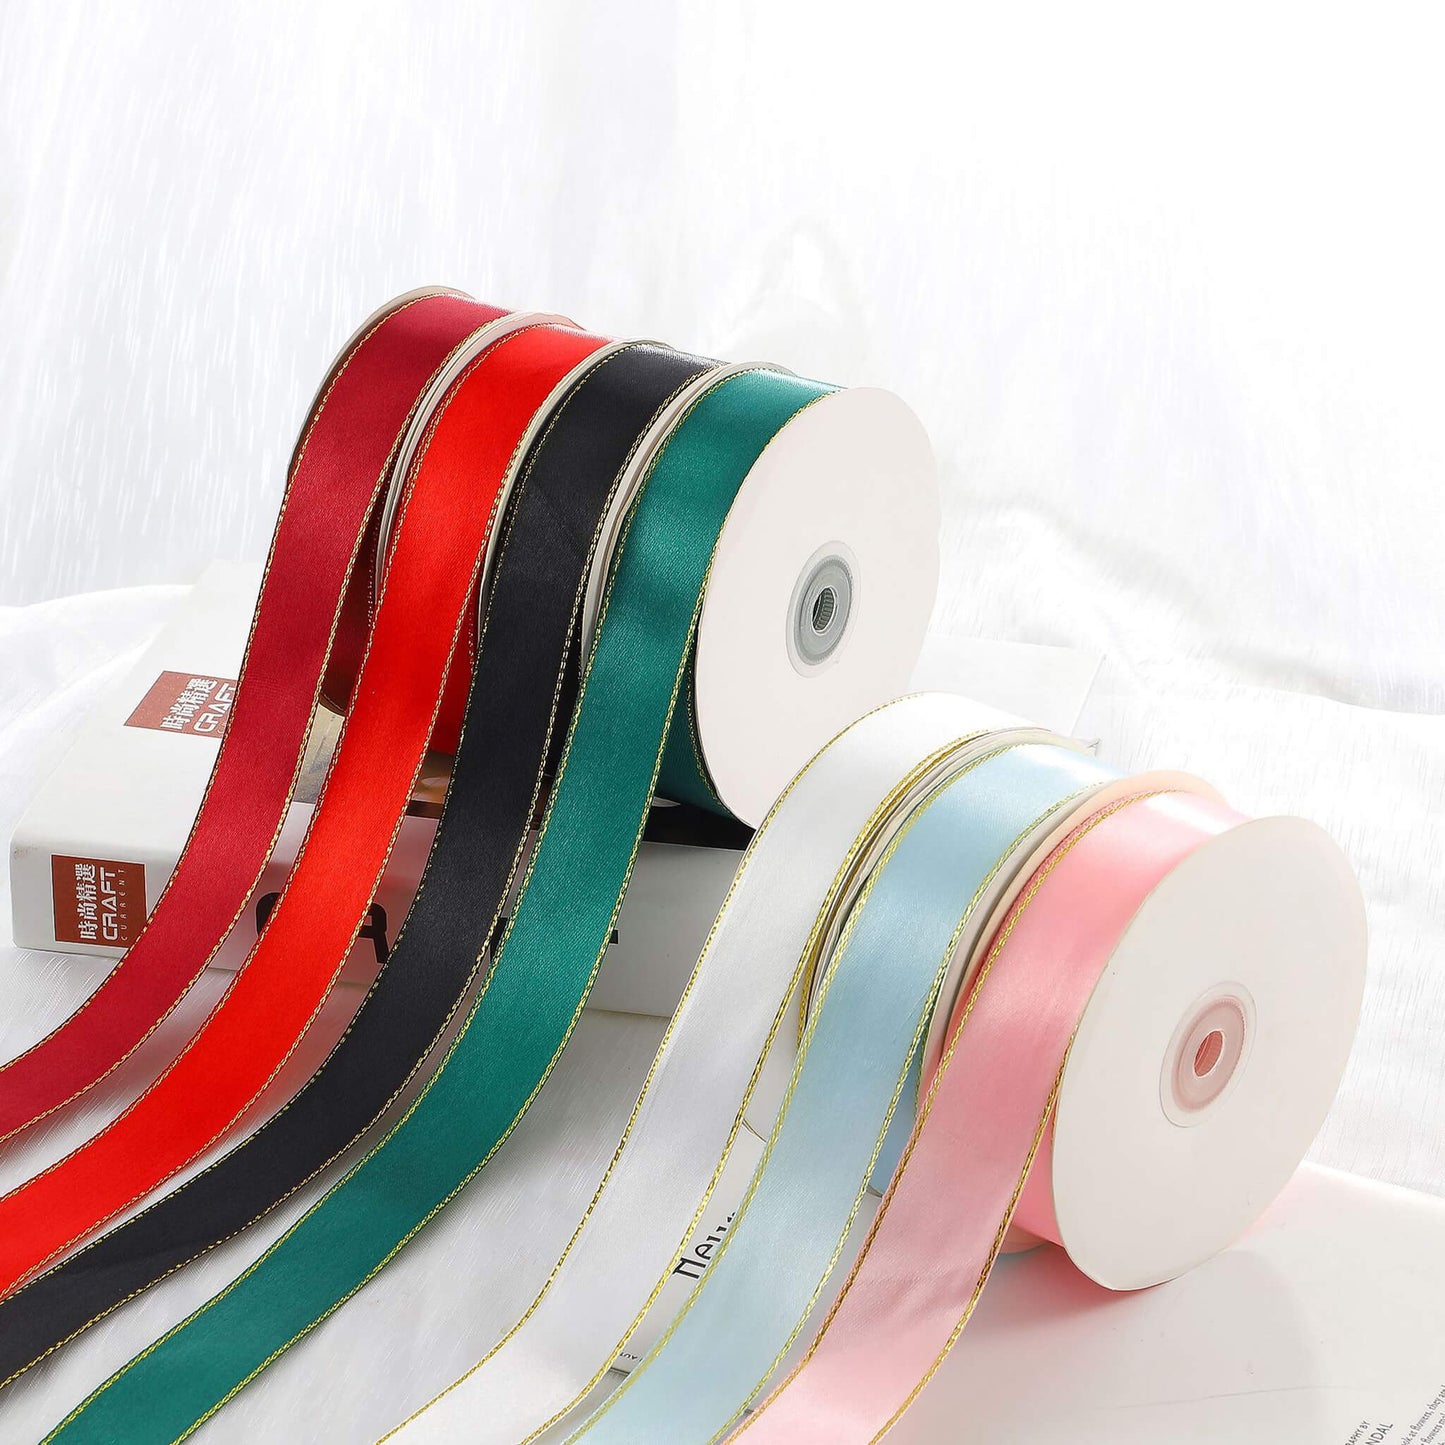 1 Inch x 50Yards Gold Satin Ribbon Solid Fabric Ribbons Roll for Gift Wrapping